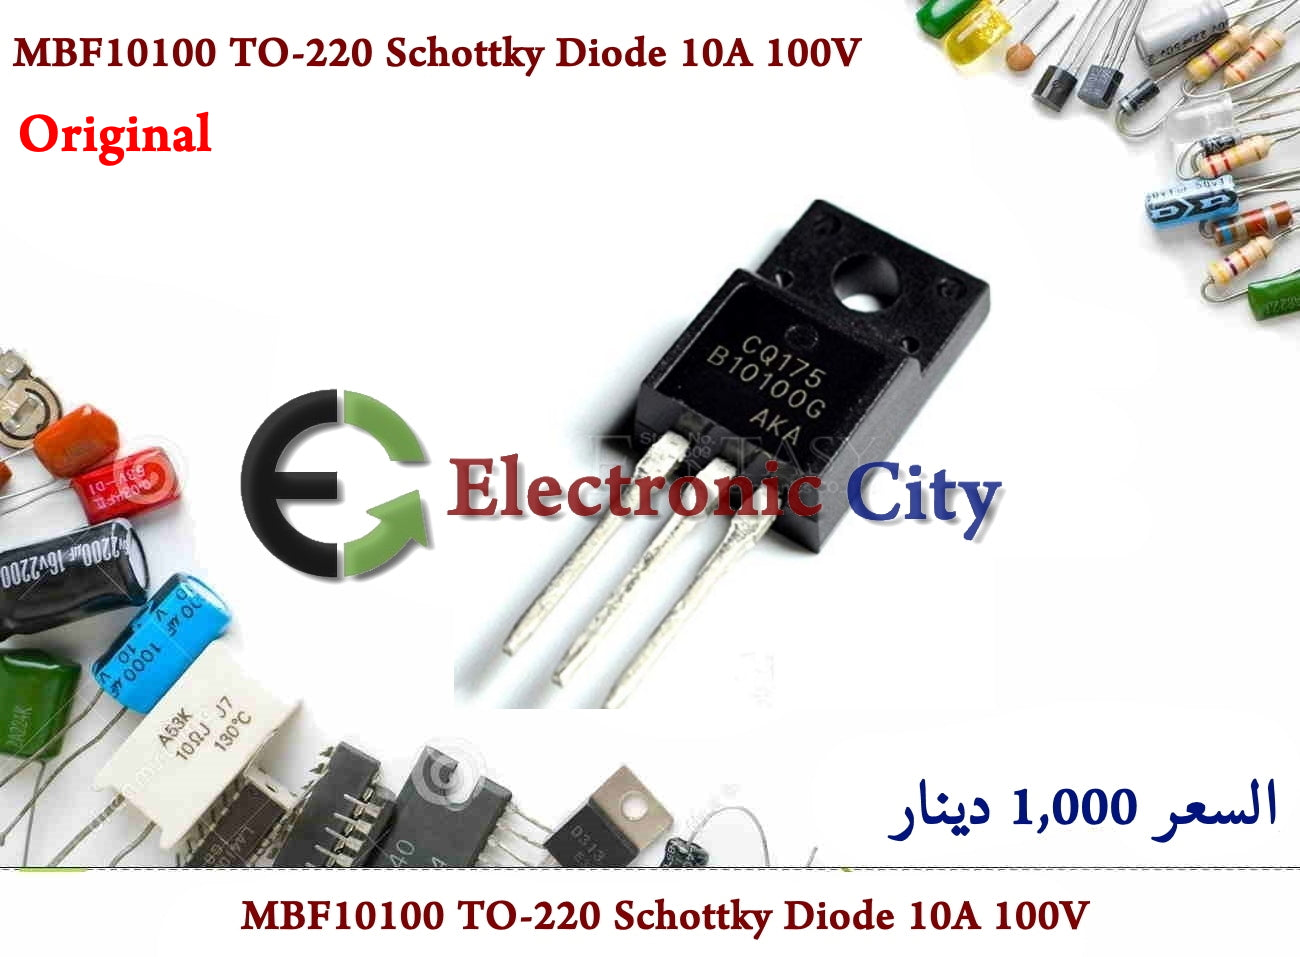 MBF10100 TO-220 Schottky Diode 10A 100V